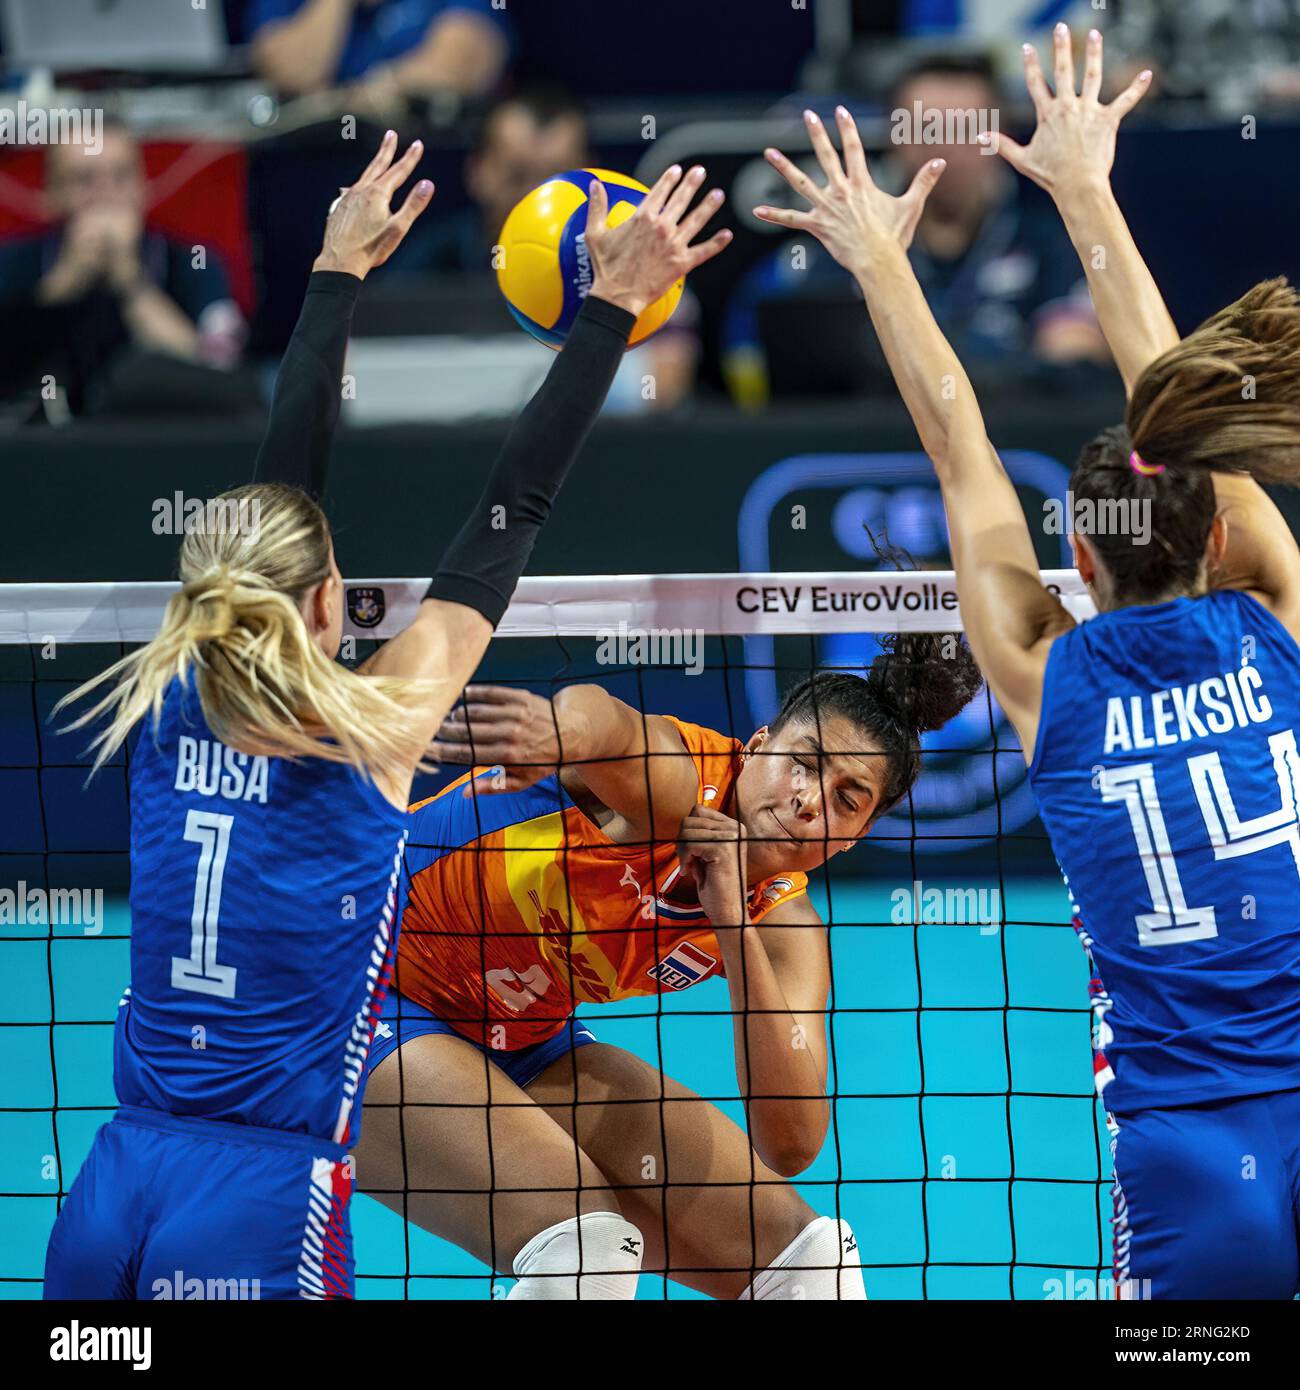 BRUSSELS - Celeste Plak in action during the semifinals of the European Volleyball Championship against reigning world champion Serbia